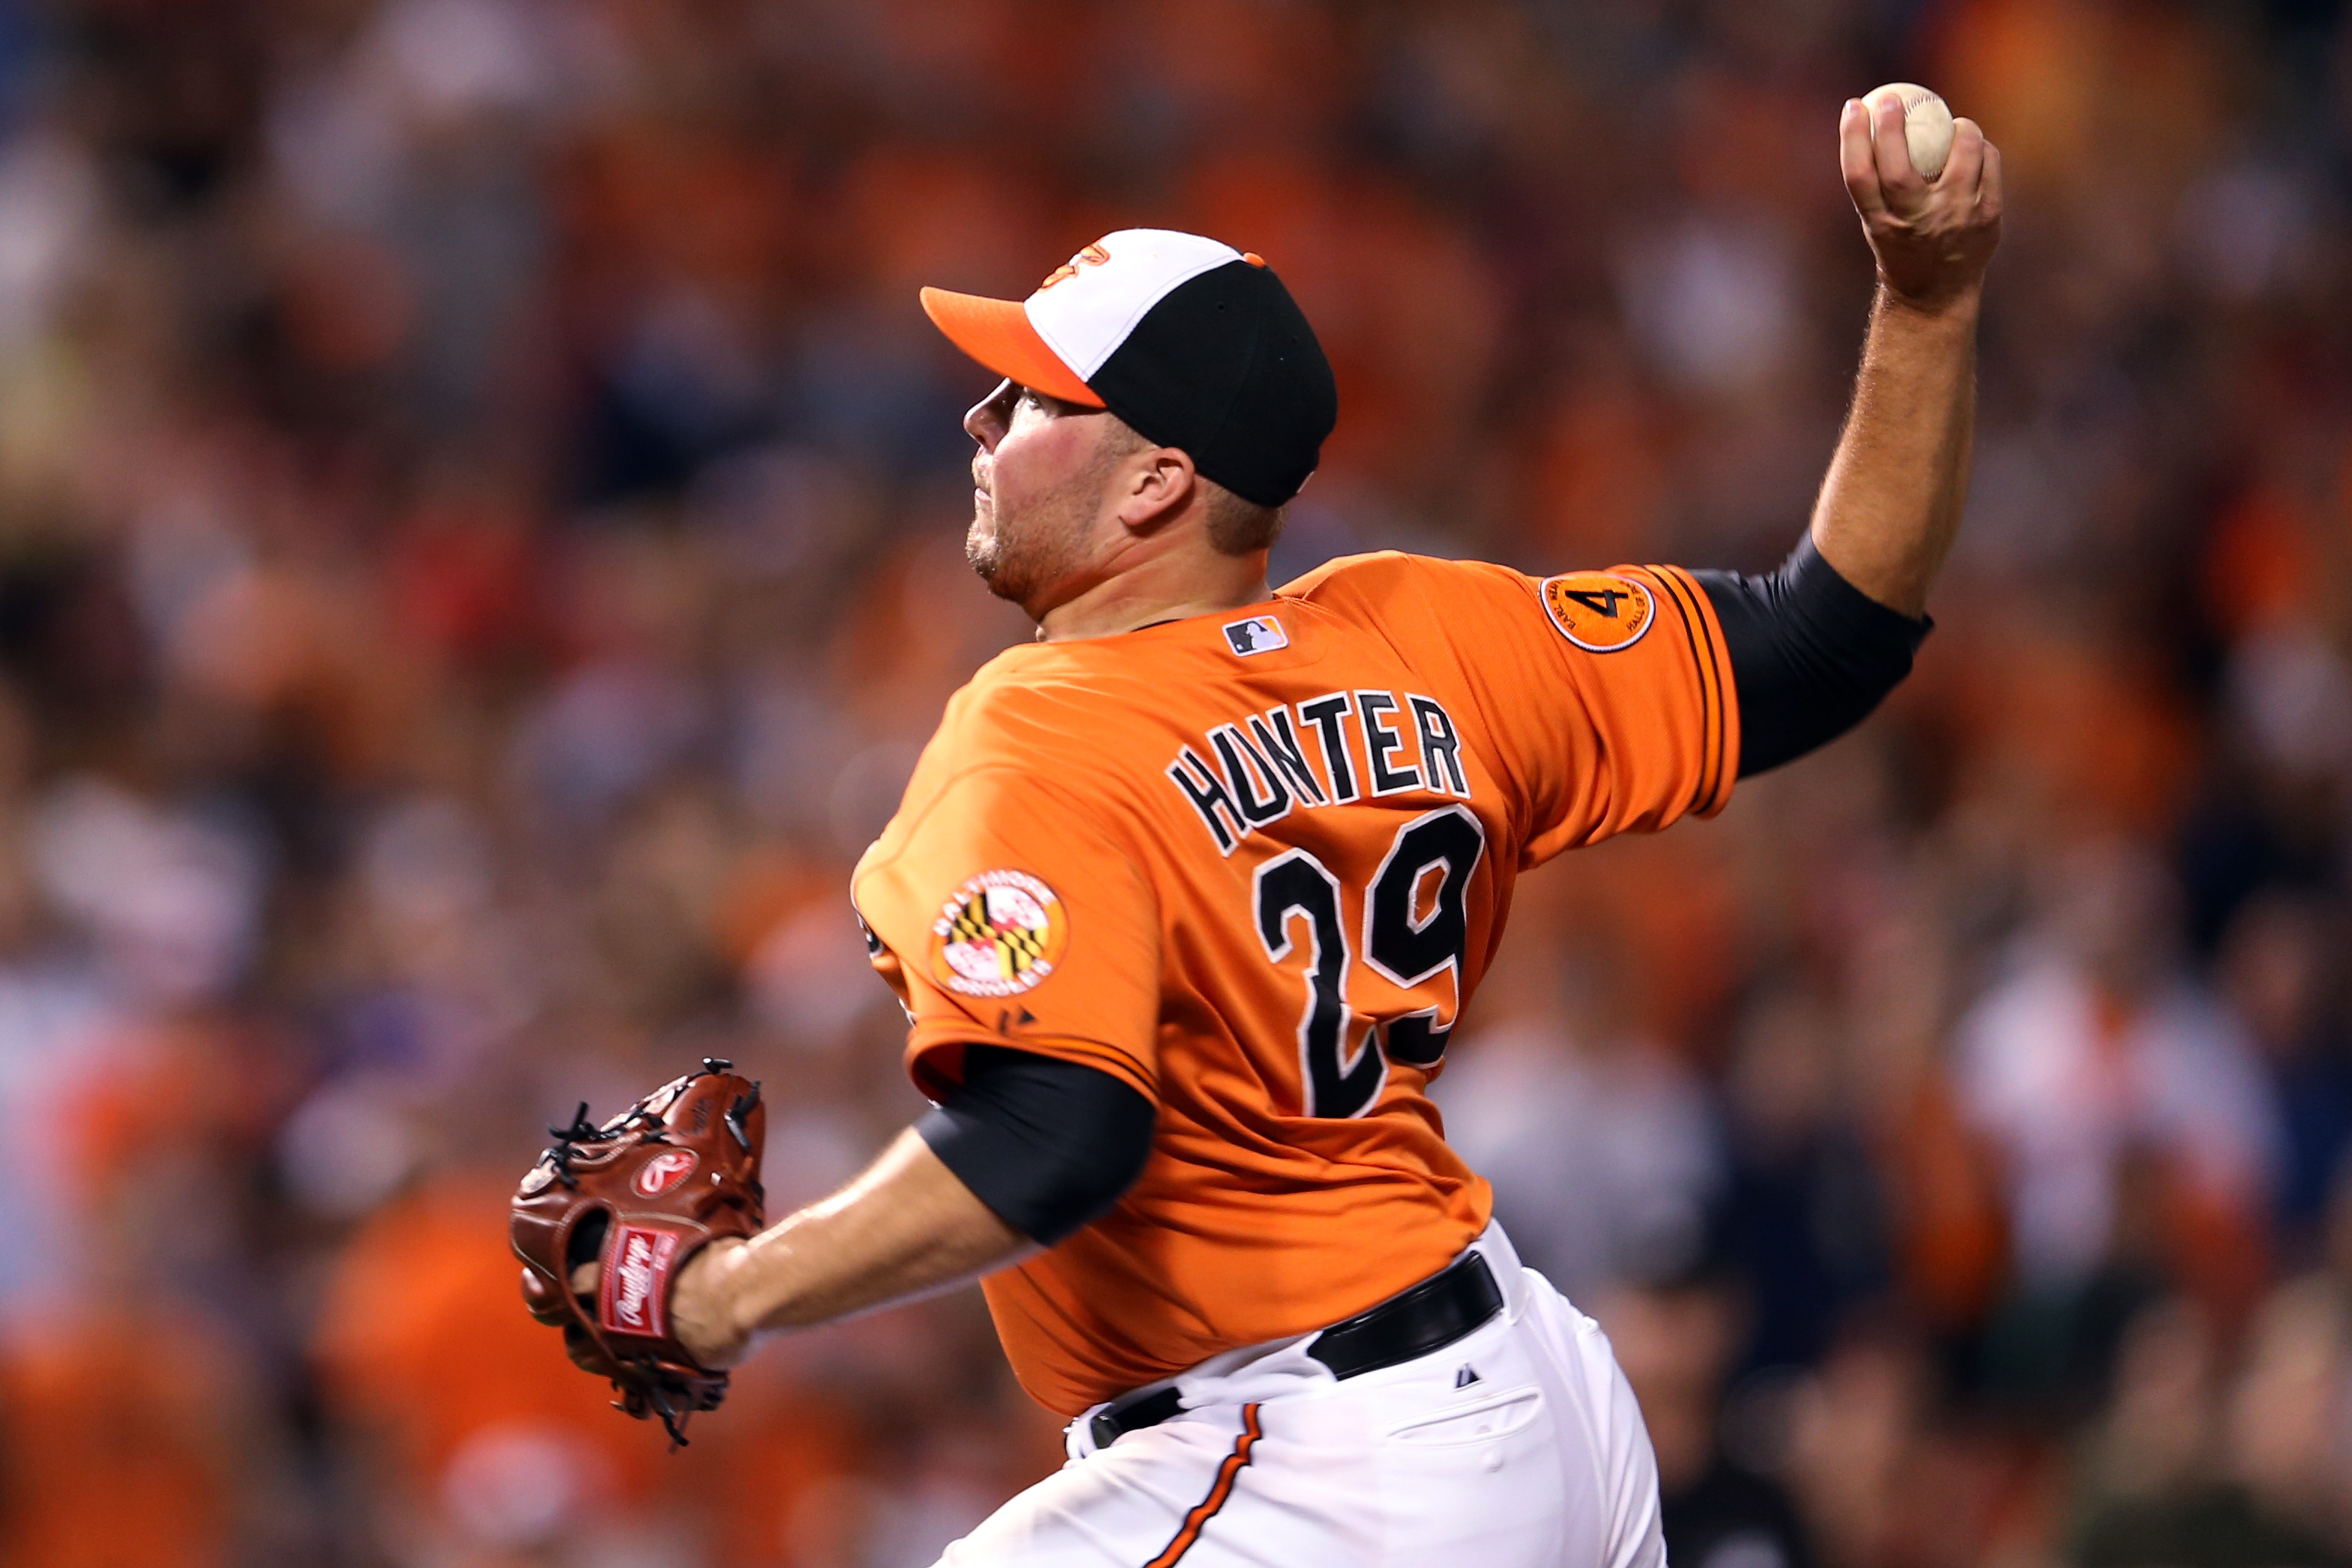 Tommy Hunter throws some heat.